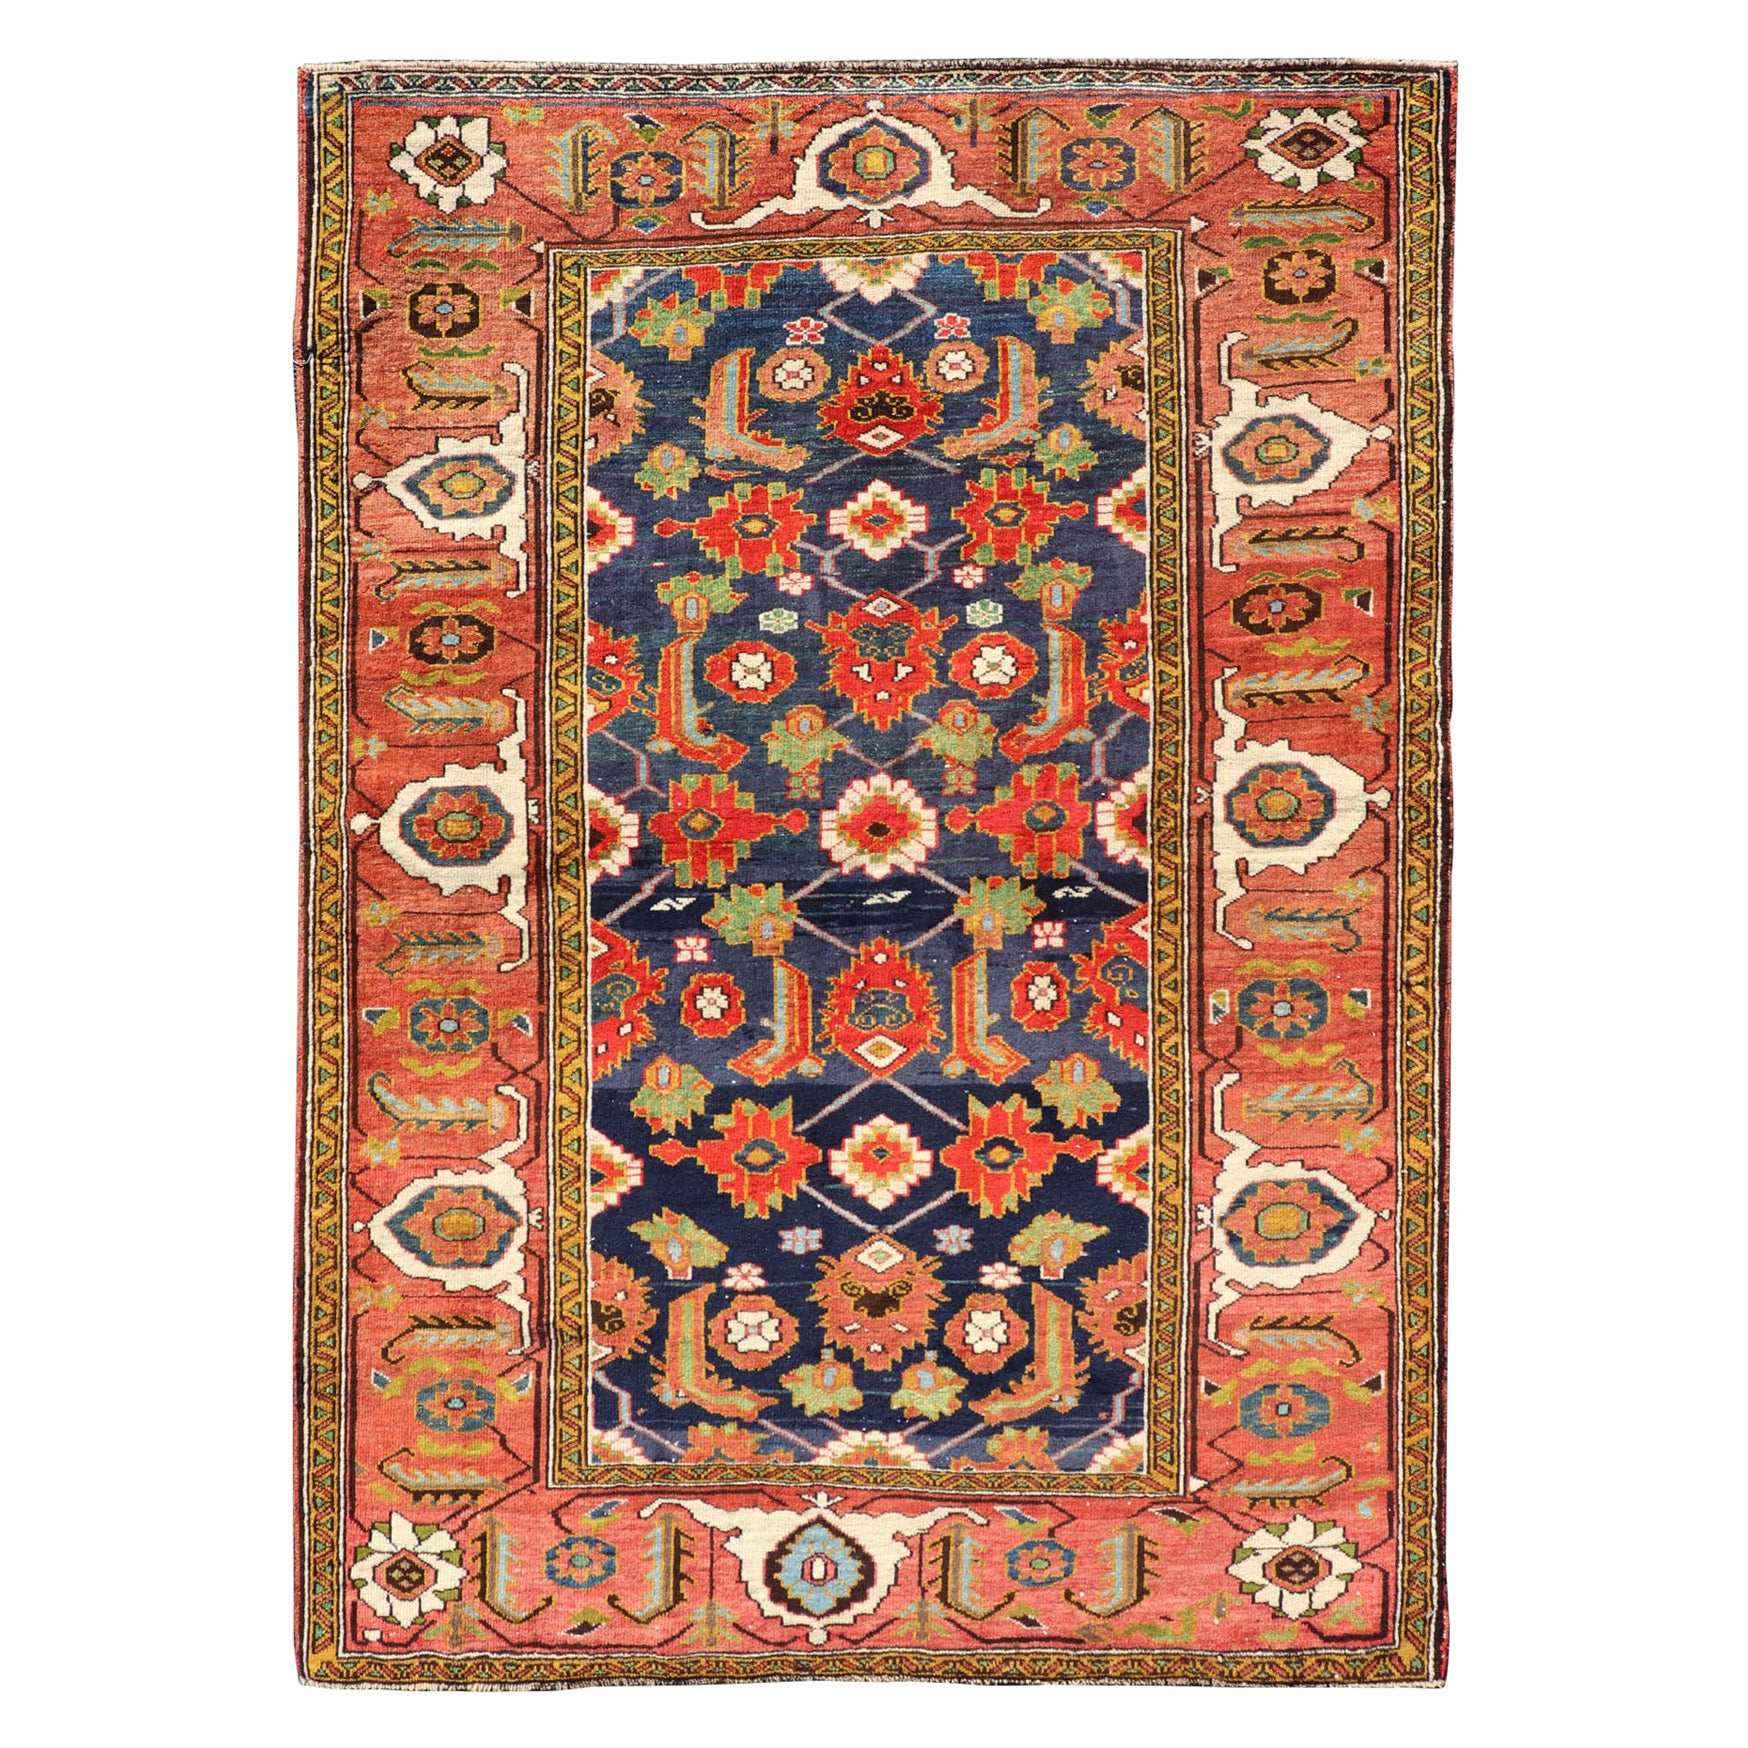 Antique Caucasian Rug with All-Over Design in Royal Blue Field, Soft Red & Green For Sale